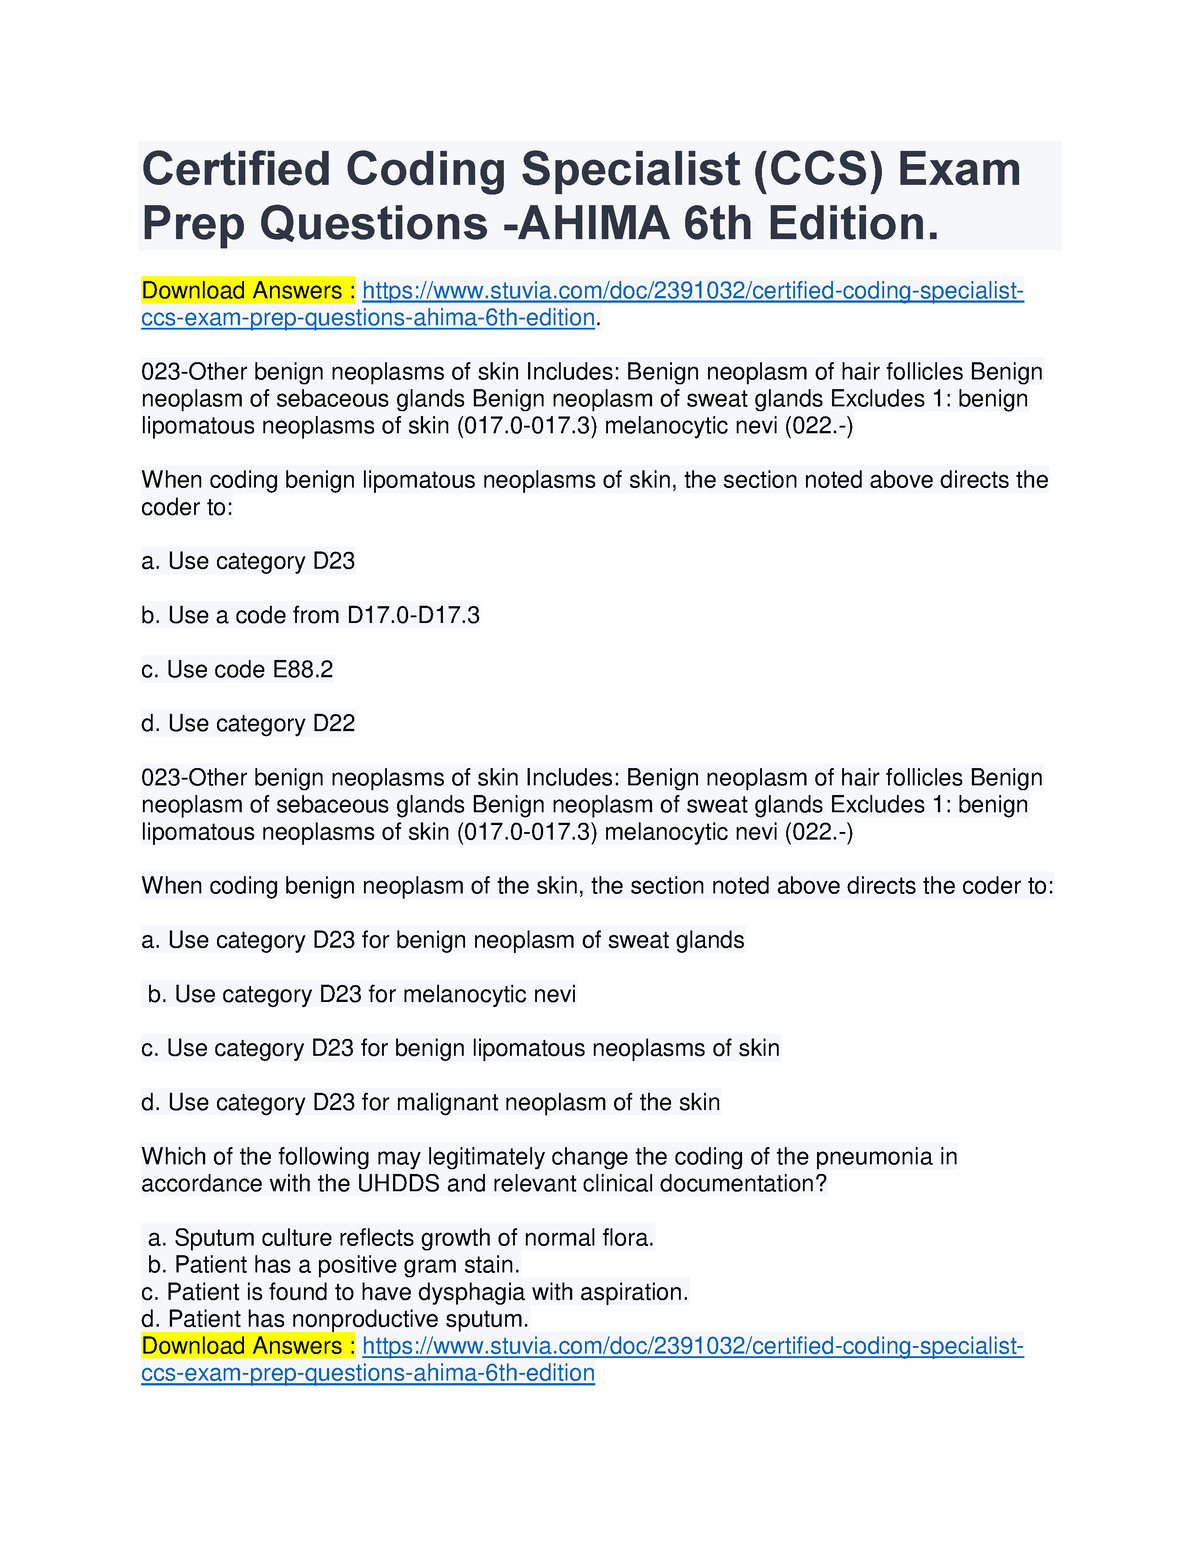 Certified Coding Specialist (CCS) Exam Prep Questions Ahima 6th